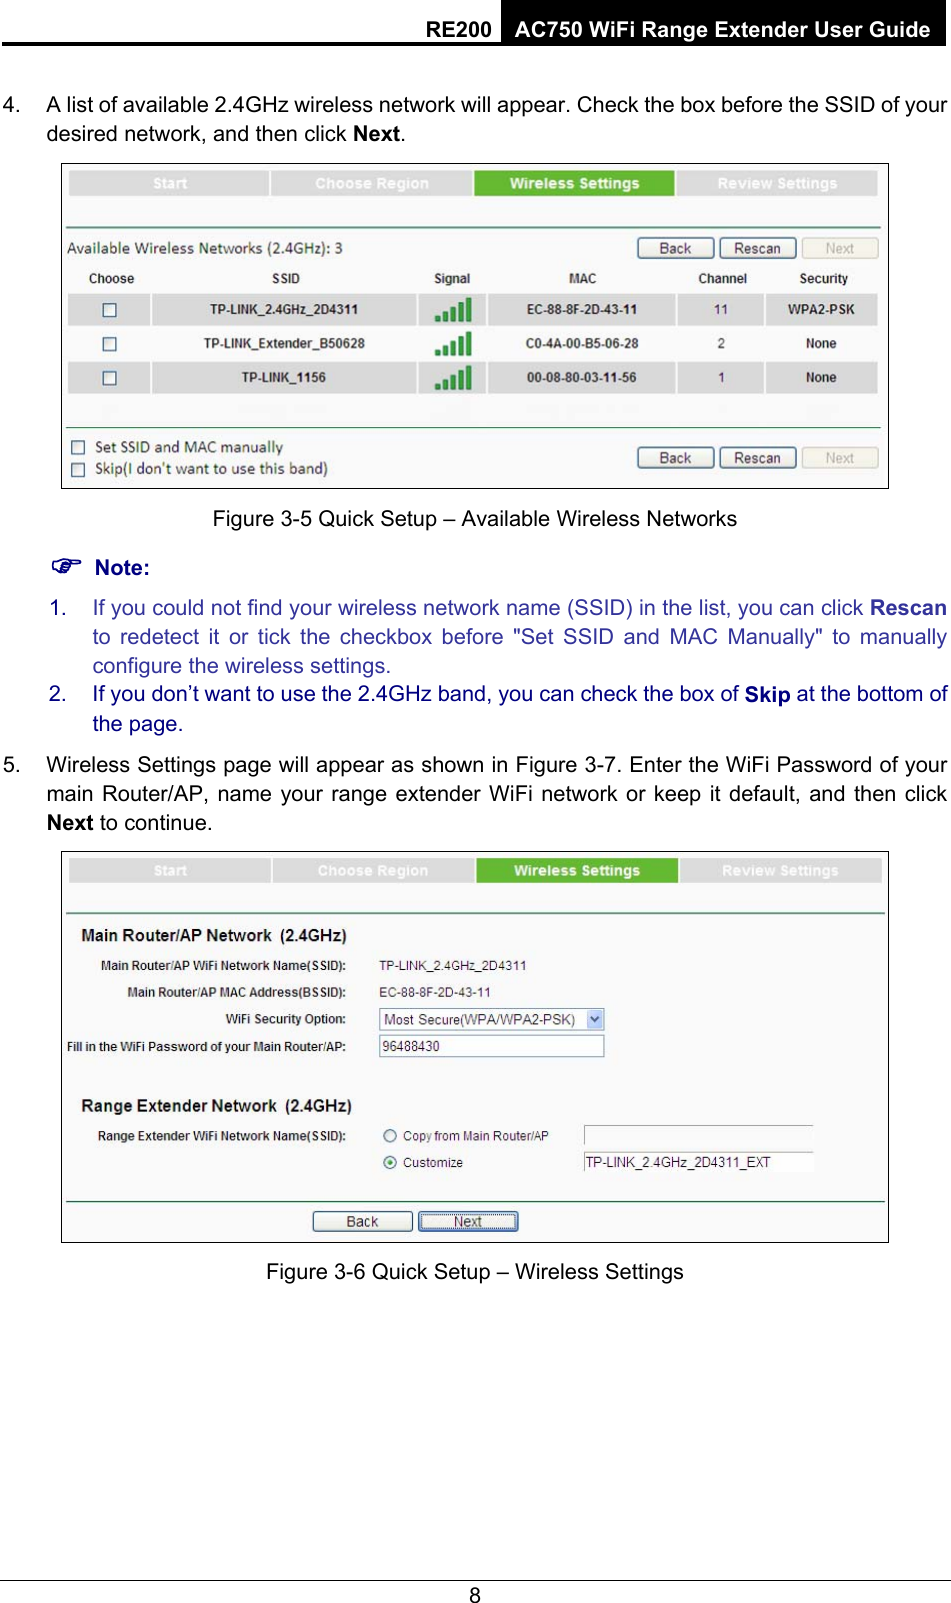 RE200 AC750 WiFi Range Extender User Guide 5.  A list of available 2.4GHz wireless network will appear. Check the box before the SSID of your desired network, and then click Next.   Figure 3-6 Quick Setup – Available Wireless Networks ) Note: 1.  If you could not find your wireless network name (SSID) in the list, you can click Rescan to redetect it or tick the checkbox before &quot;Set SSID and MAC Manually&quot; to manually configure the wireless settings. 2.  If you don’t want to use the 2.4GHz band, you can check the box of Skip at the bottom of the page. 6.  Wireless Settings page will appear as shown in Figure 3-7. Enter the WiFi Password of your main Router/AP, name your range extender WiFi network or keep it default, and then click Next to continue.  Figure 3-7 Quick Setup – Wireless Settings 8 4.Figure 3-5 Quick Setup – Available Wireless Networks 5.Figure 3-6 Quick Setup – Wireless Settings 